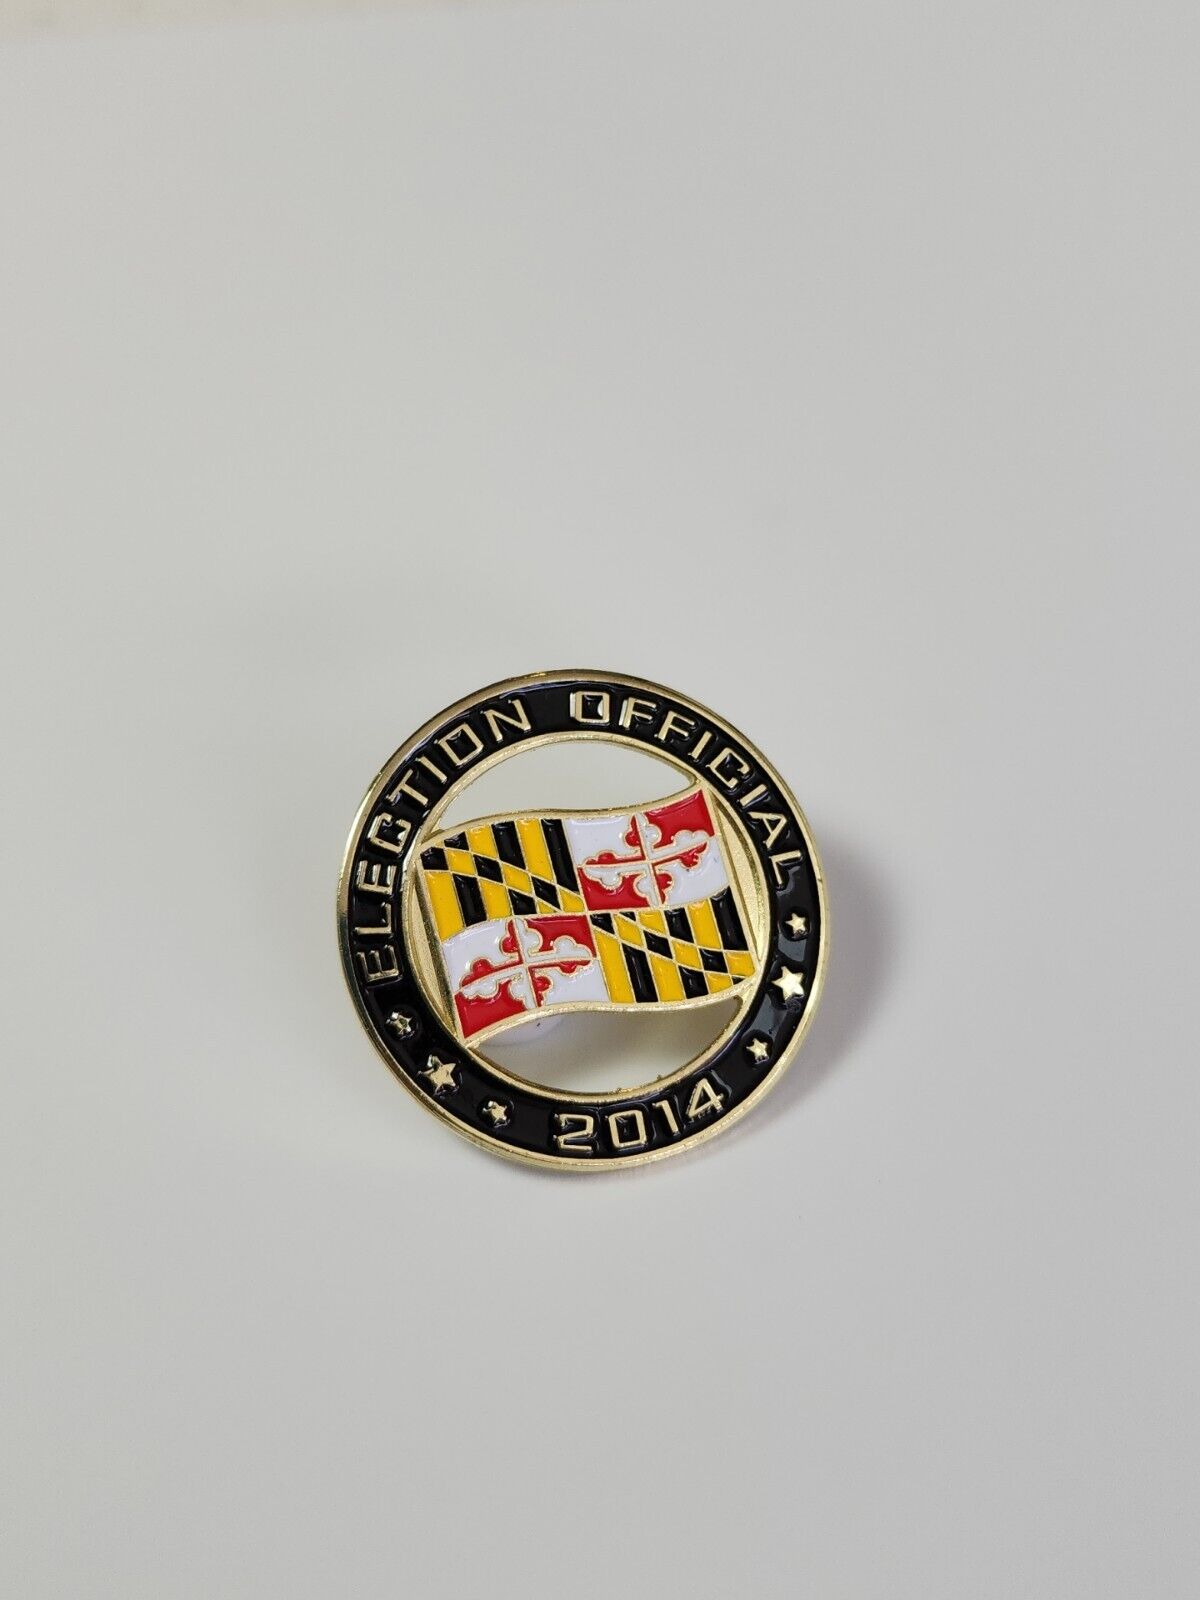 Maryland Election Official 2014 Lapel Pin